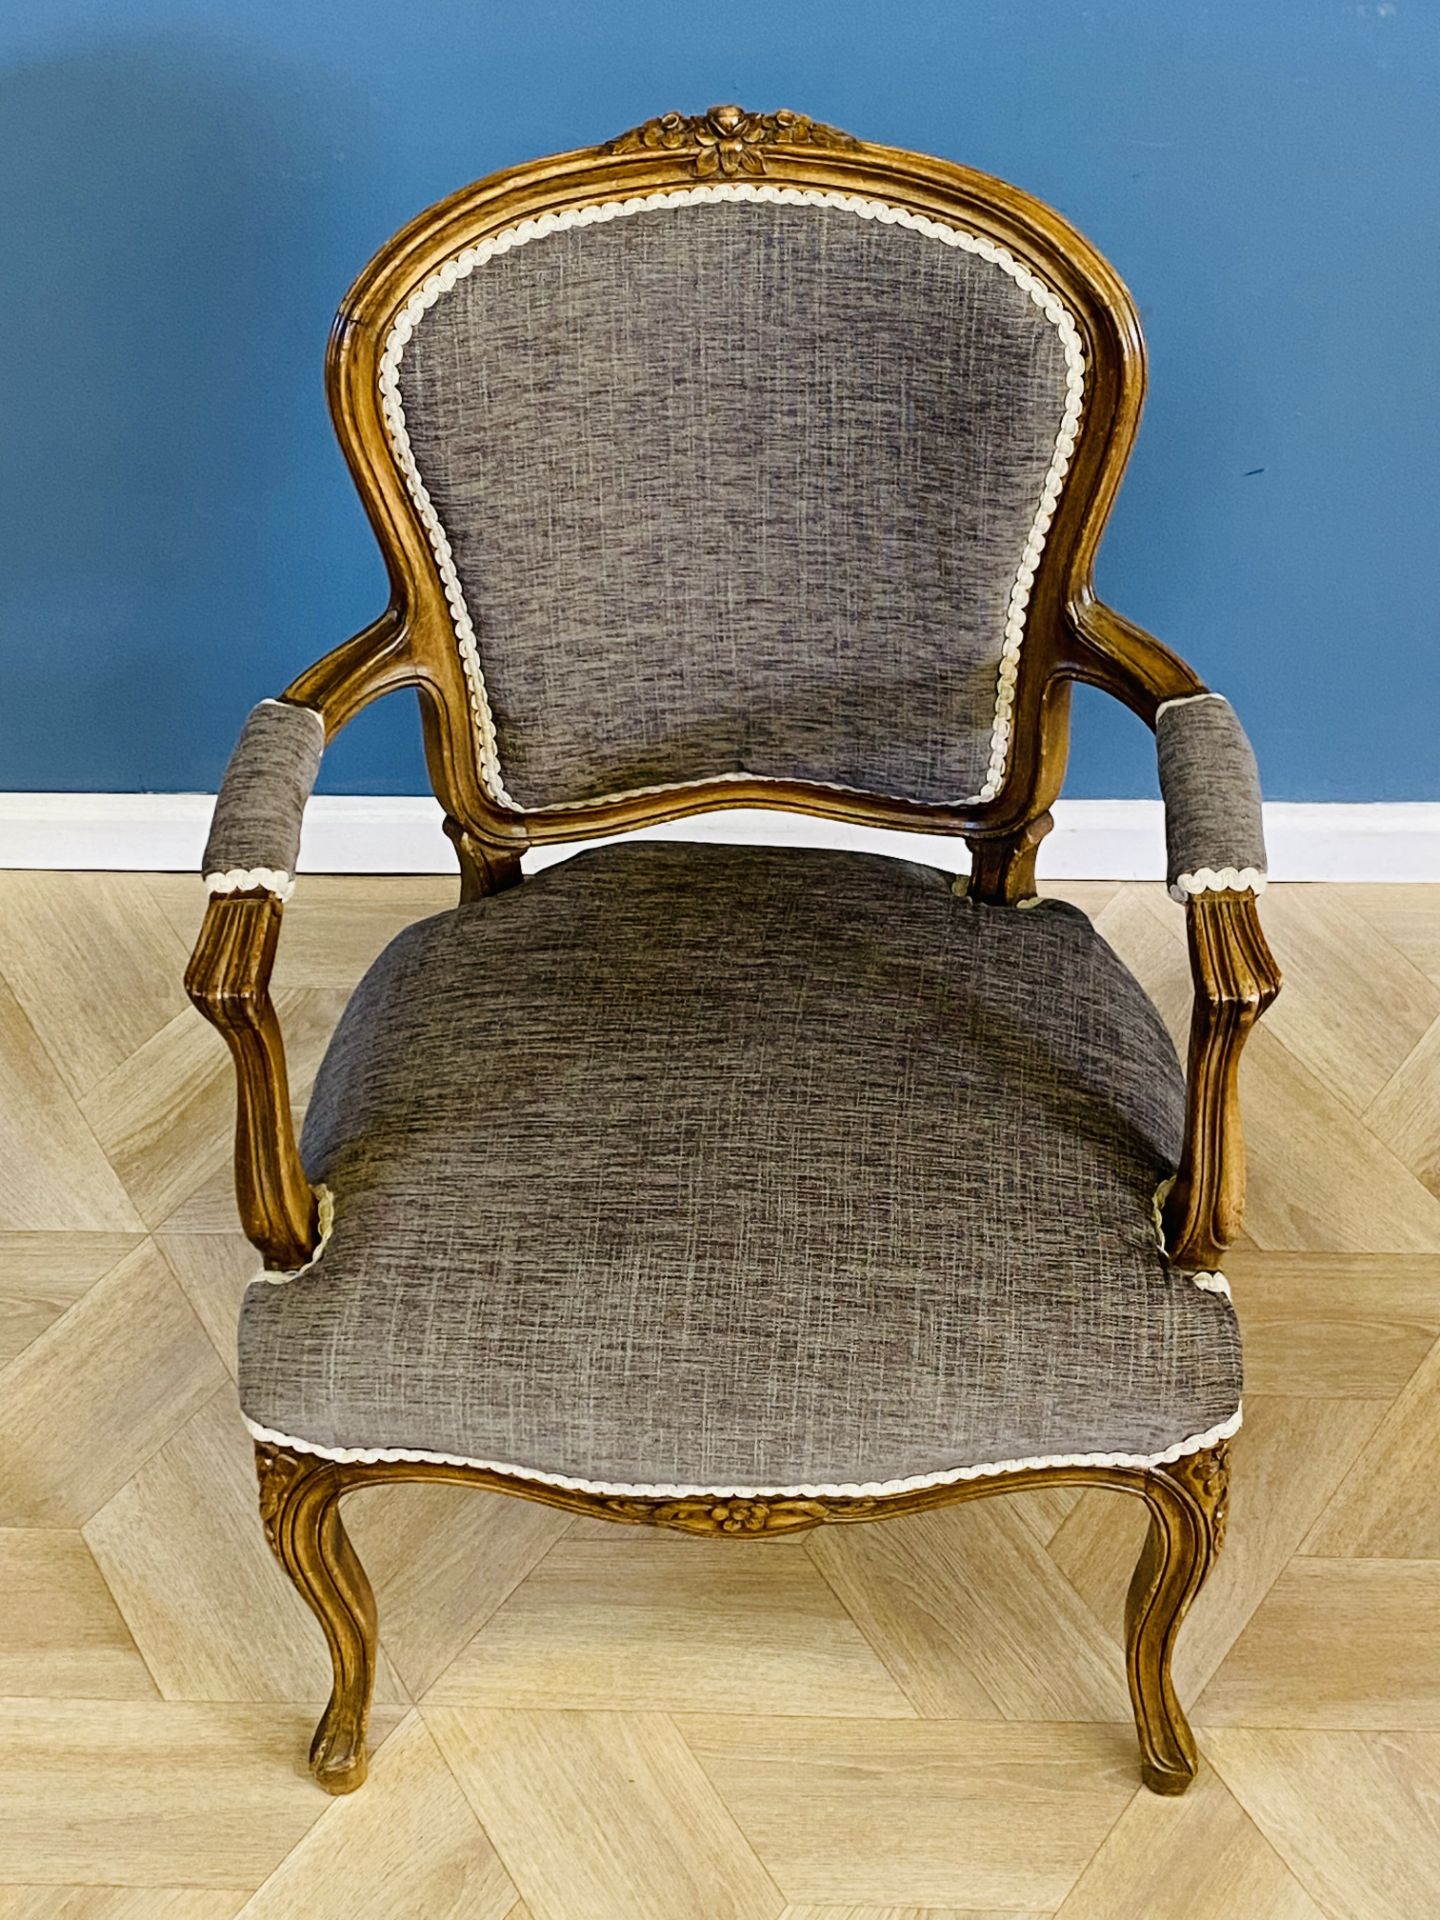 Pair of French style elbow chairs - Image 6 of 8